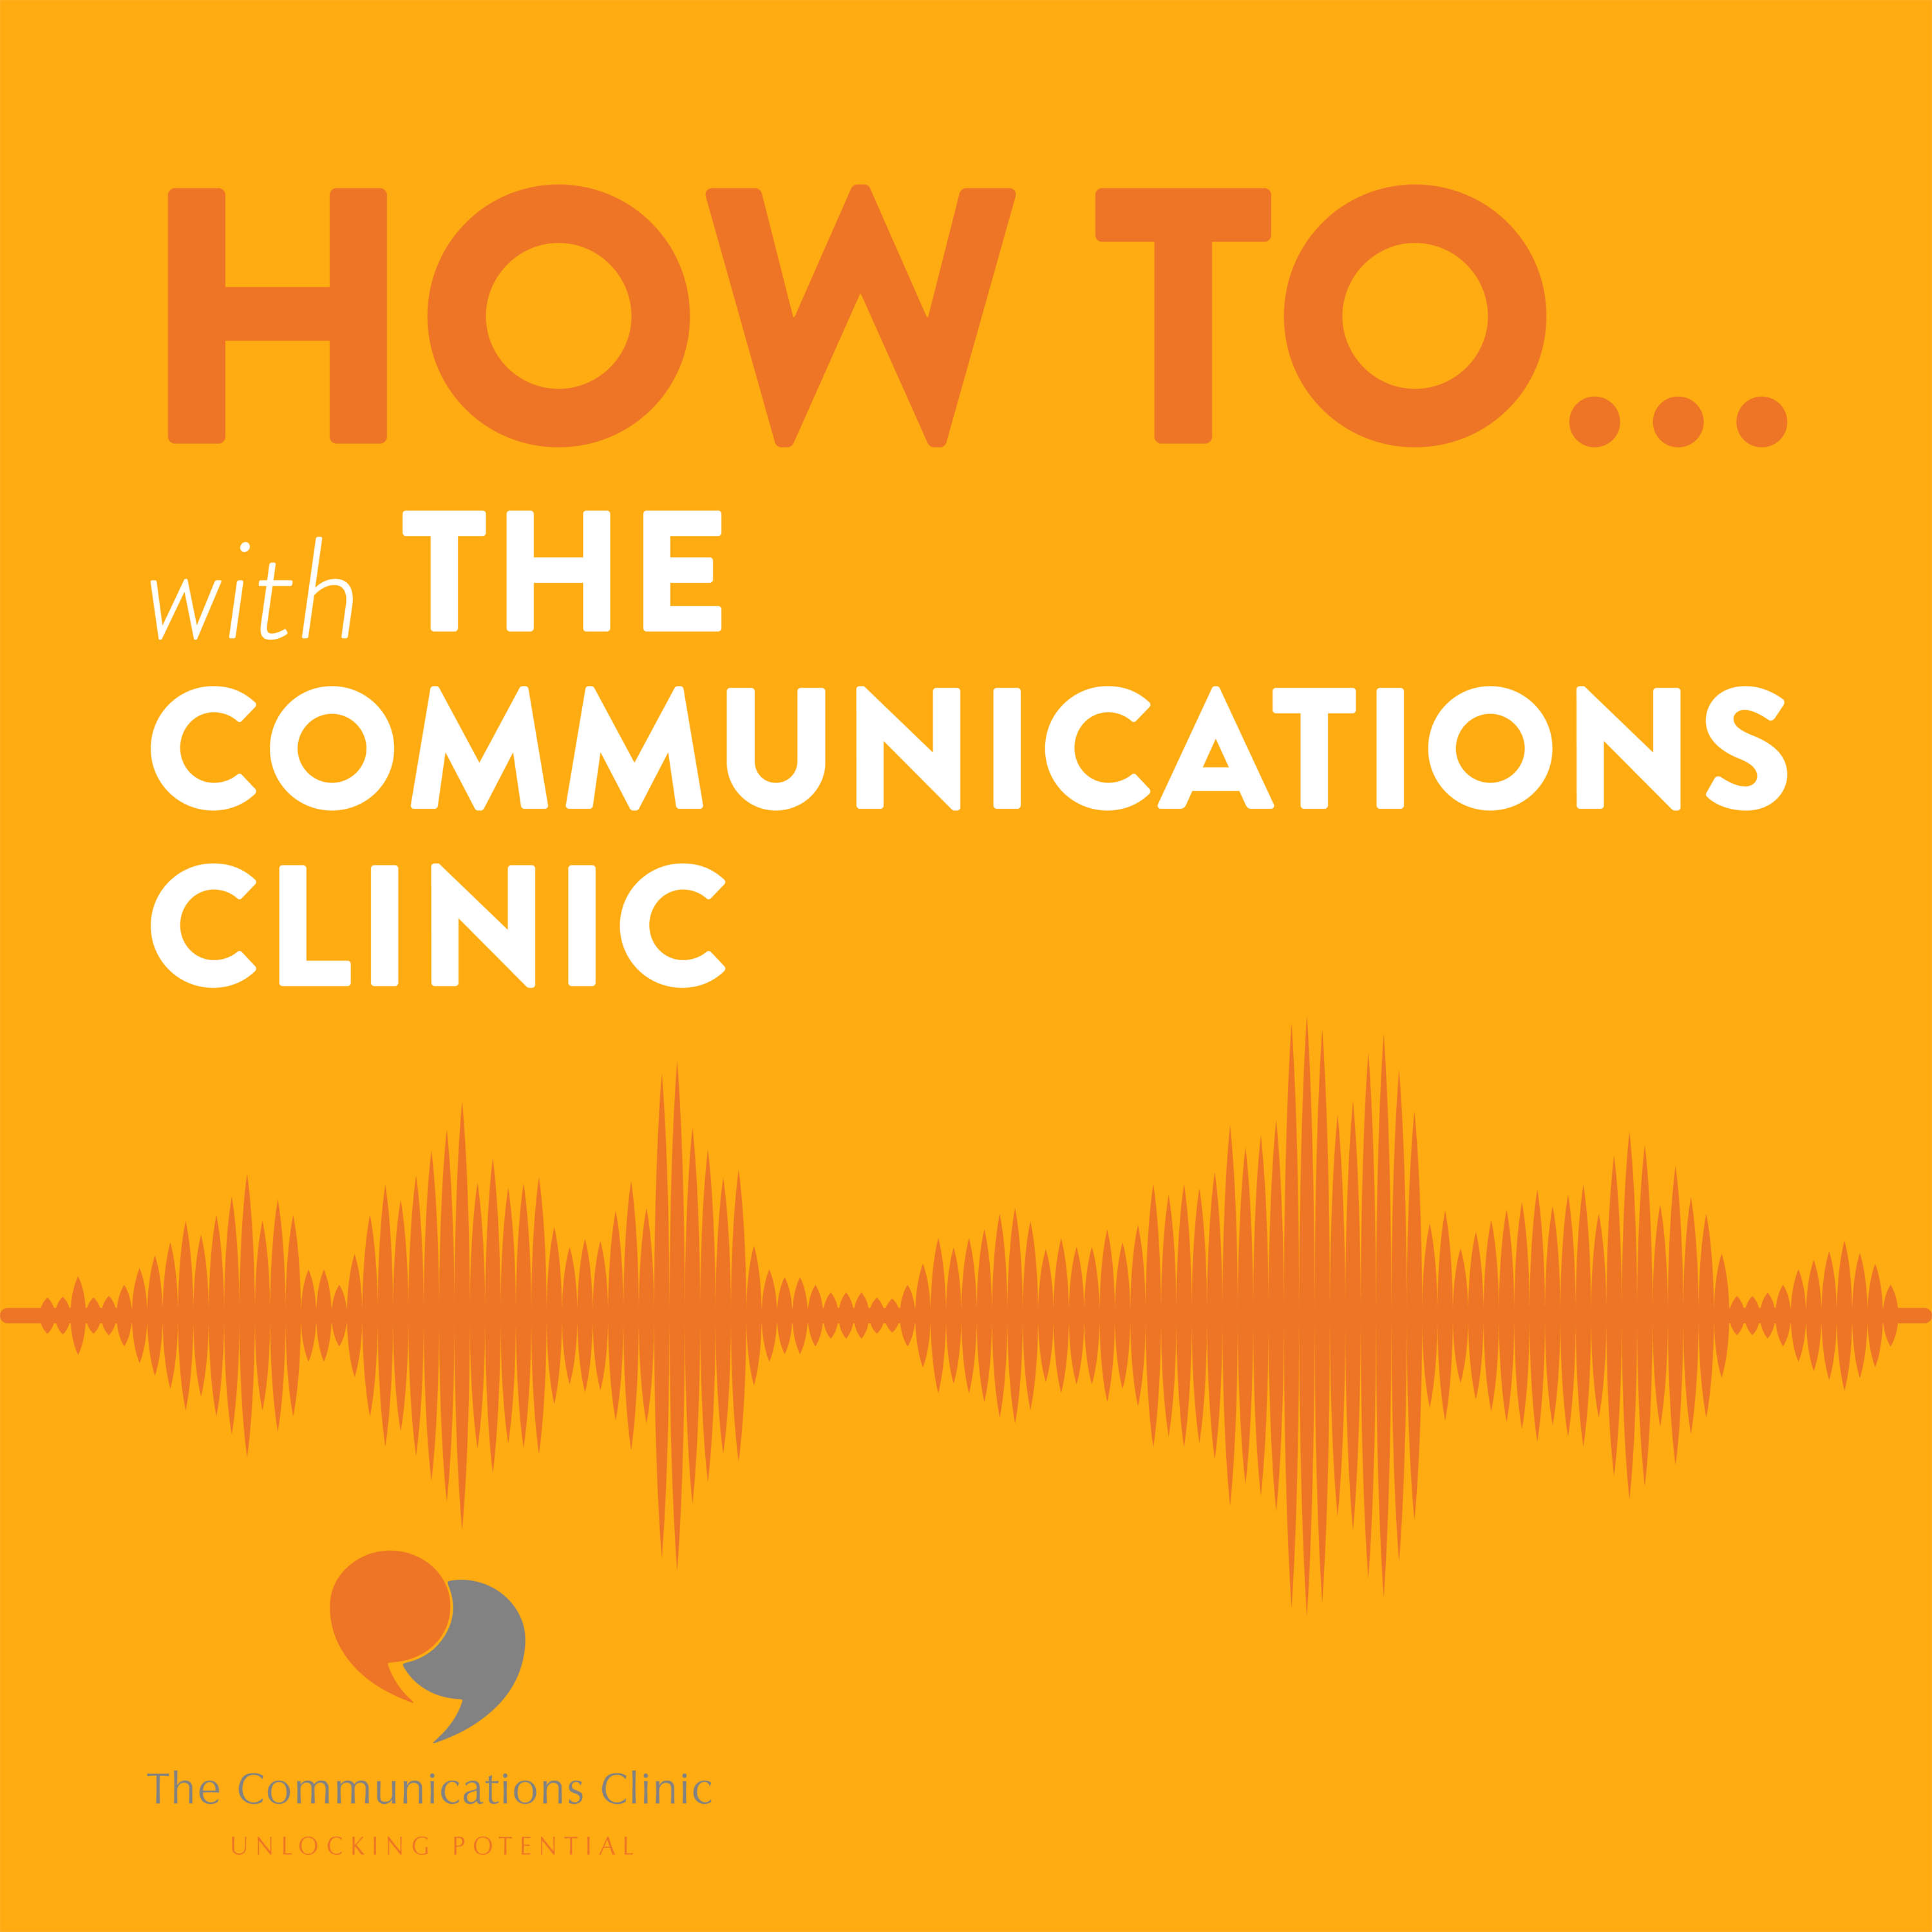 How To... with The Communications Clinic